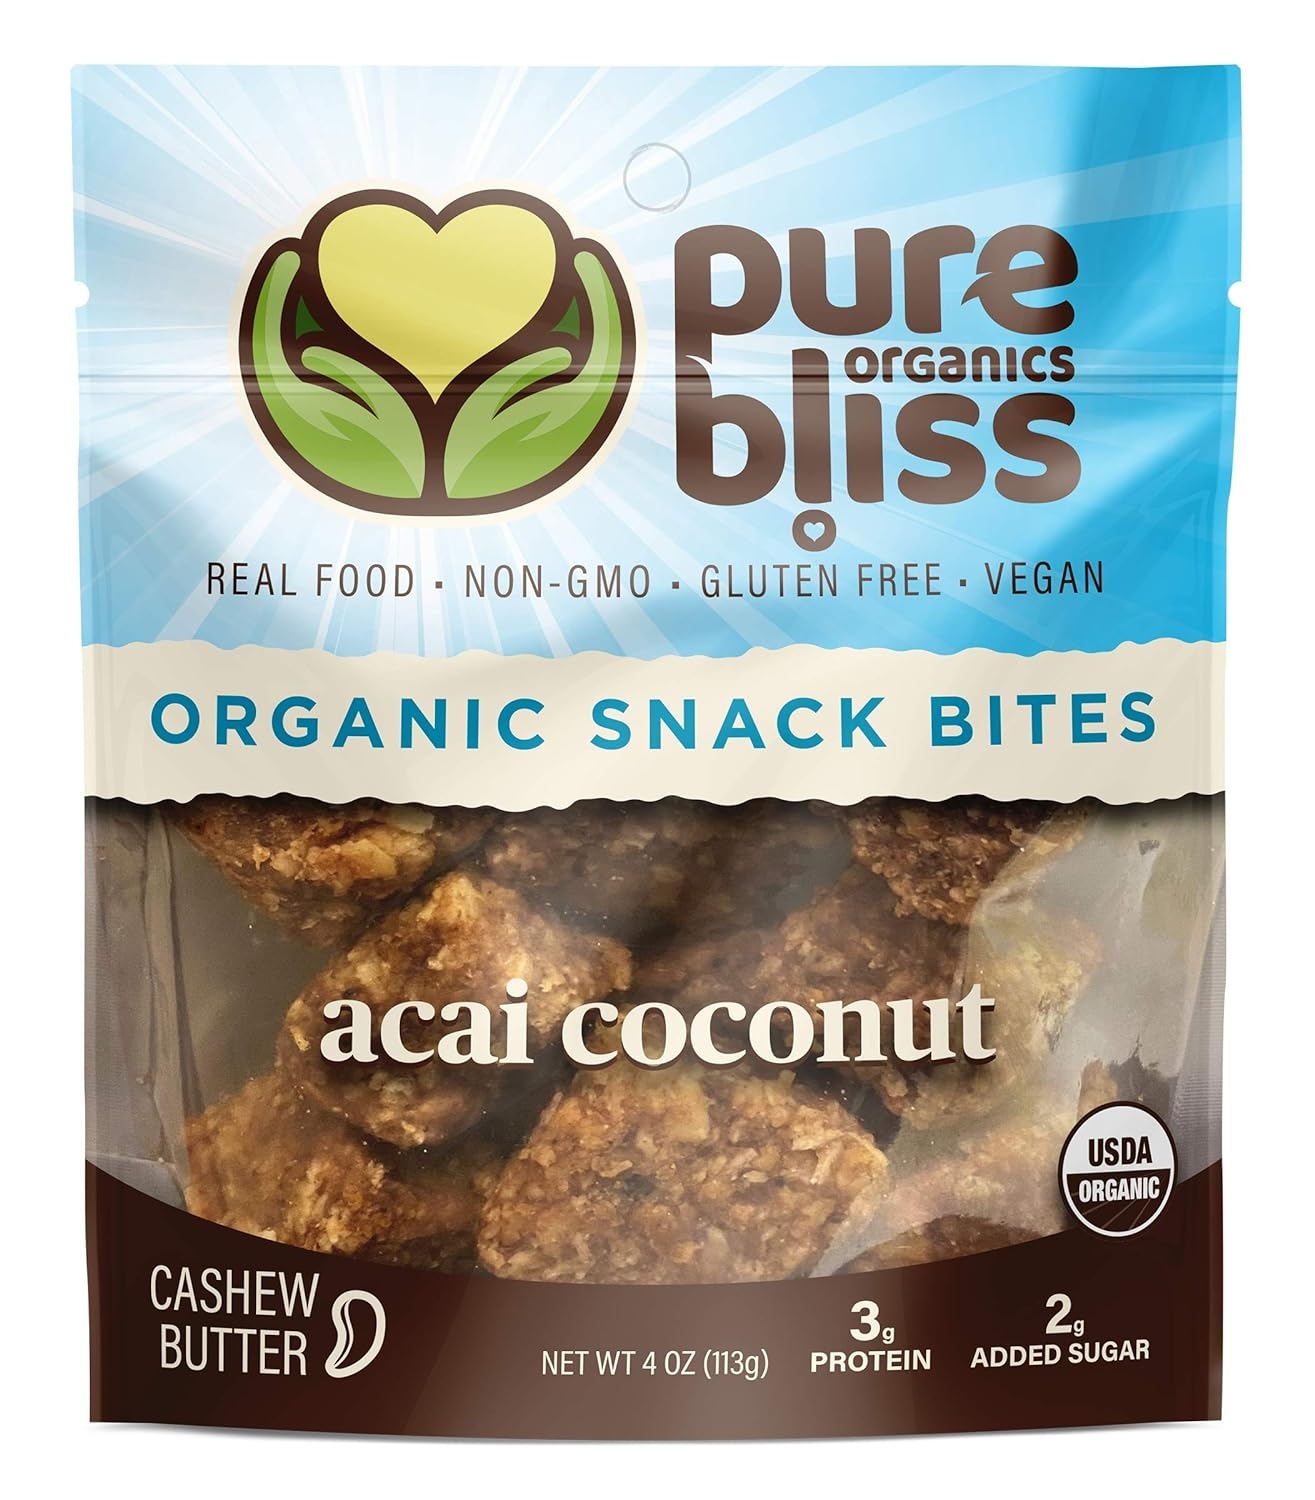 Organic Super Food Energy Bites - Acai Coconut - Non-GMO, Gluten Free, Vegan, Whole Food Healthy Snack Bites, Dairy Free, Soy Free Pure Bliss Organics: Acai Coconut Cashew Butter (3 pack - 4oz each)